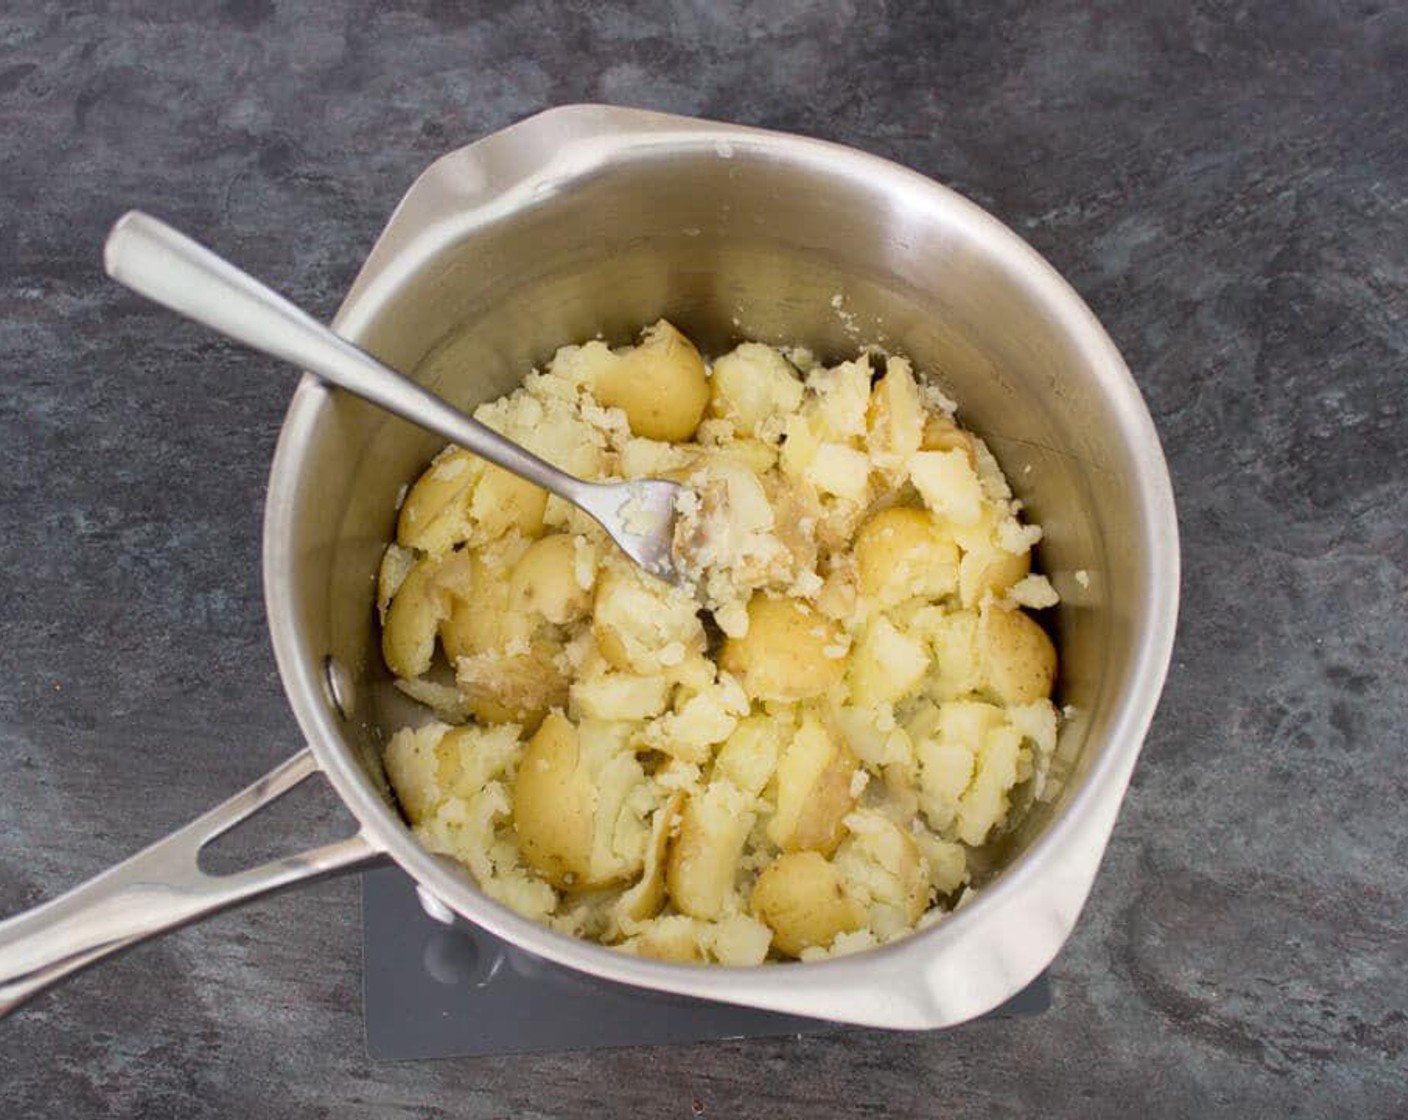 step 2 Drain the potatoes well then gently crush with a fork. You want a good mix of large & small chunks.